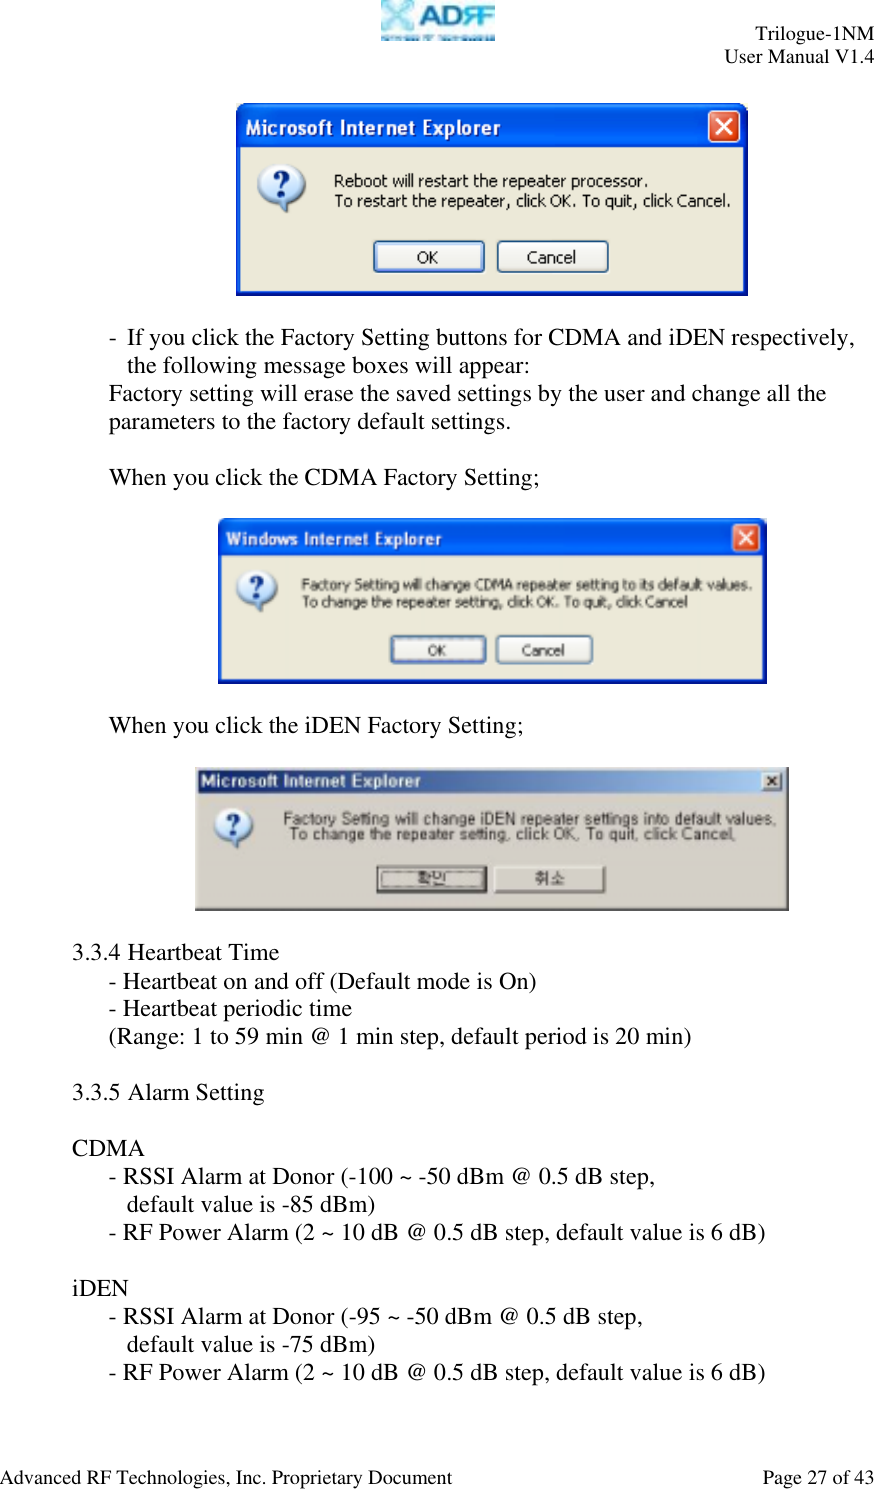     Trilogue-1NM User Manual V1.4  Advanced RF Technologies, Inc. Proprietary Document  Page 27 of 43    - If you click the Factory Setting buttons for CDMA and iDEN respectively, the following message boxes will appear: Factory setting will erase the saved settings by the user and change all the parameters to the factory default settings.  When you click the CDMA Factory Setting;    When you click the iDEN Factory Setting;    3.3.4 Heartbeat Time  - Heartbeat on and off (Default mode is On) - Heartbeat periodic time (Range: 1 to 59 min @ 1 min step, default period is 20 min)  3.3.5 Alarm Setting    CDMA  - RSSI Alarm at Donor (-100 ~ -50 dBm @ 0.5 dB step,  default value is -85 dBm) - RF Power Alarm (2 ~ 10 dB @ 0.5 dB step, default value is 6 dB)  iDEN  - RSSI Alarm at Donor (-95 ~ -50 dBm @ 0.5 dB step,  default value is -75 dBm) - RF Power Alarm (2 ~ 10 dB @ 0.5 dB step, default value is 6 dB) 